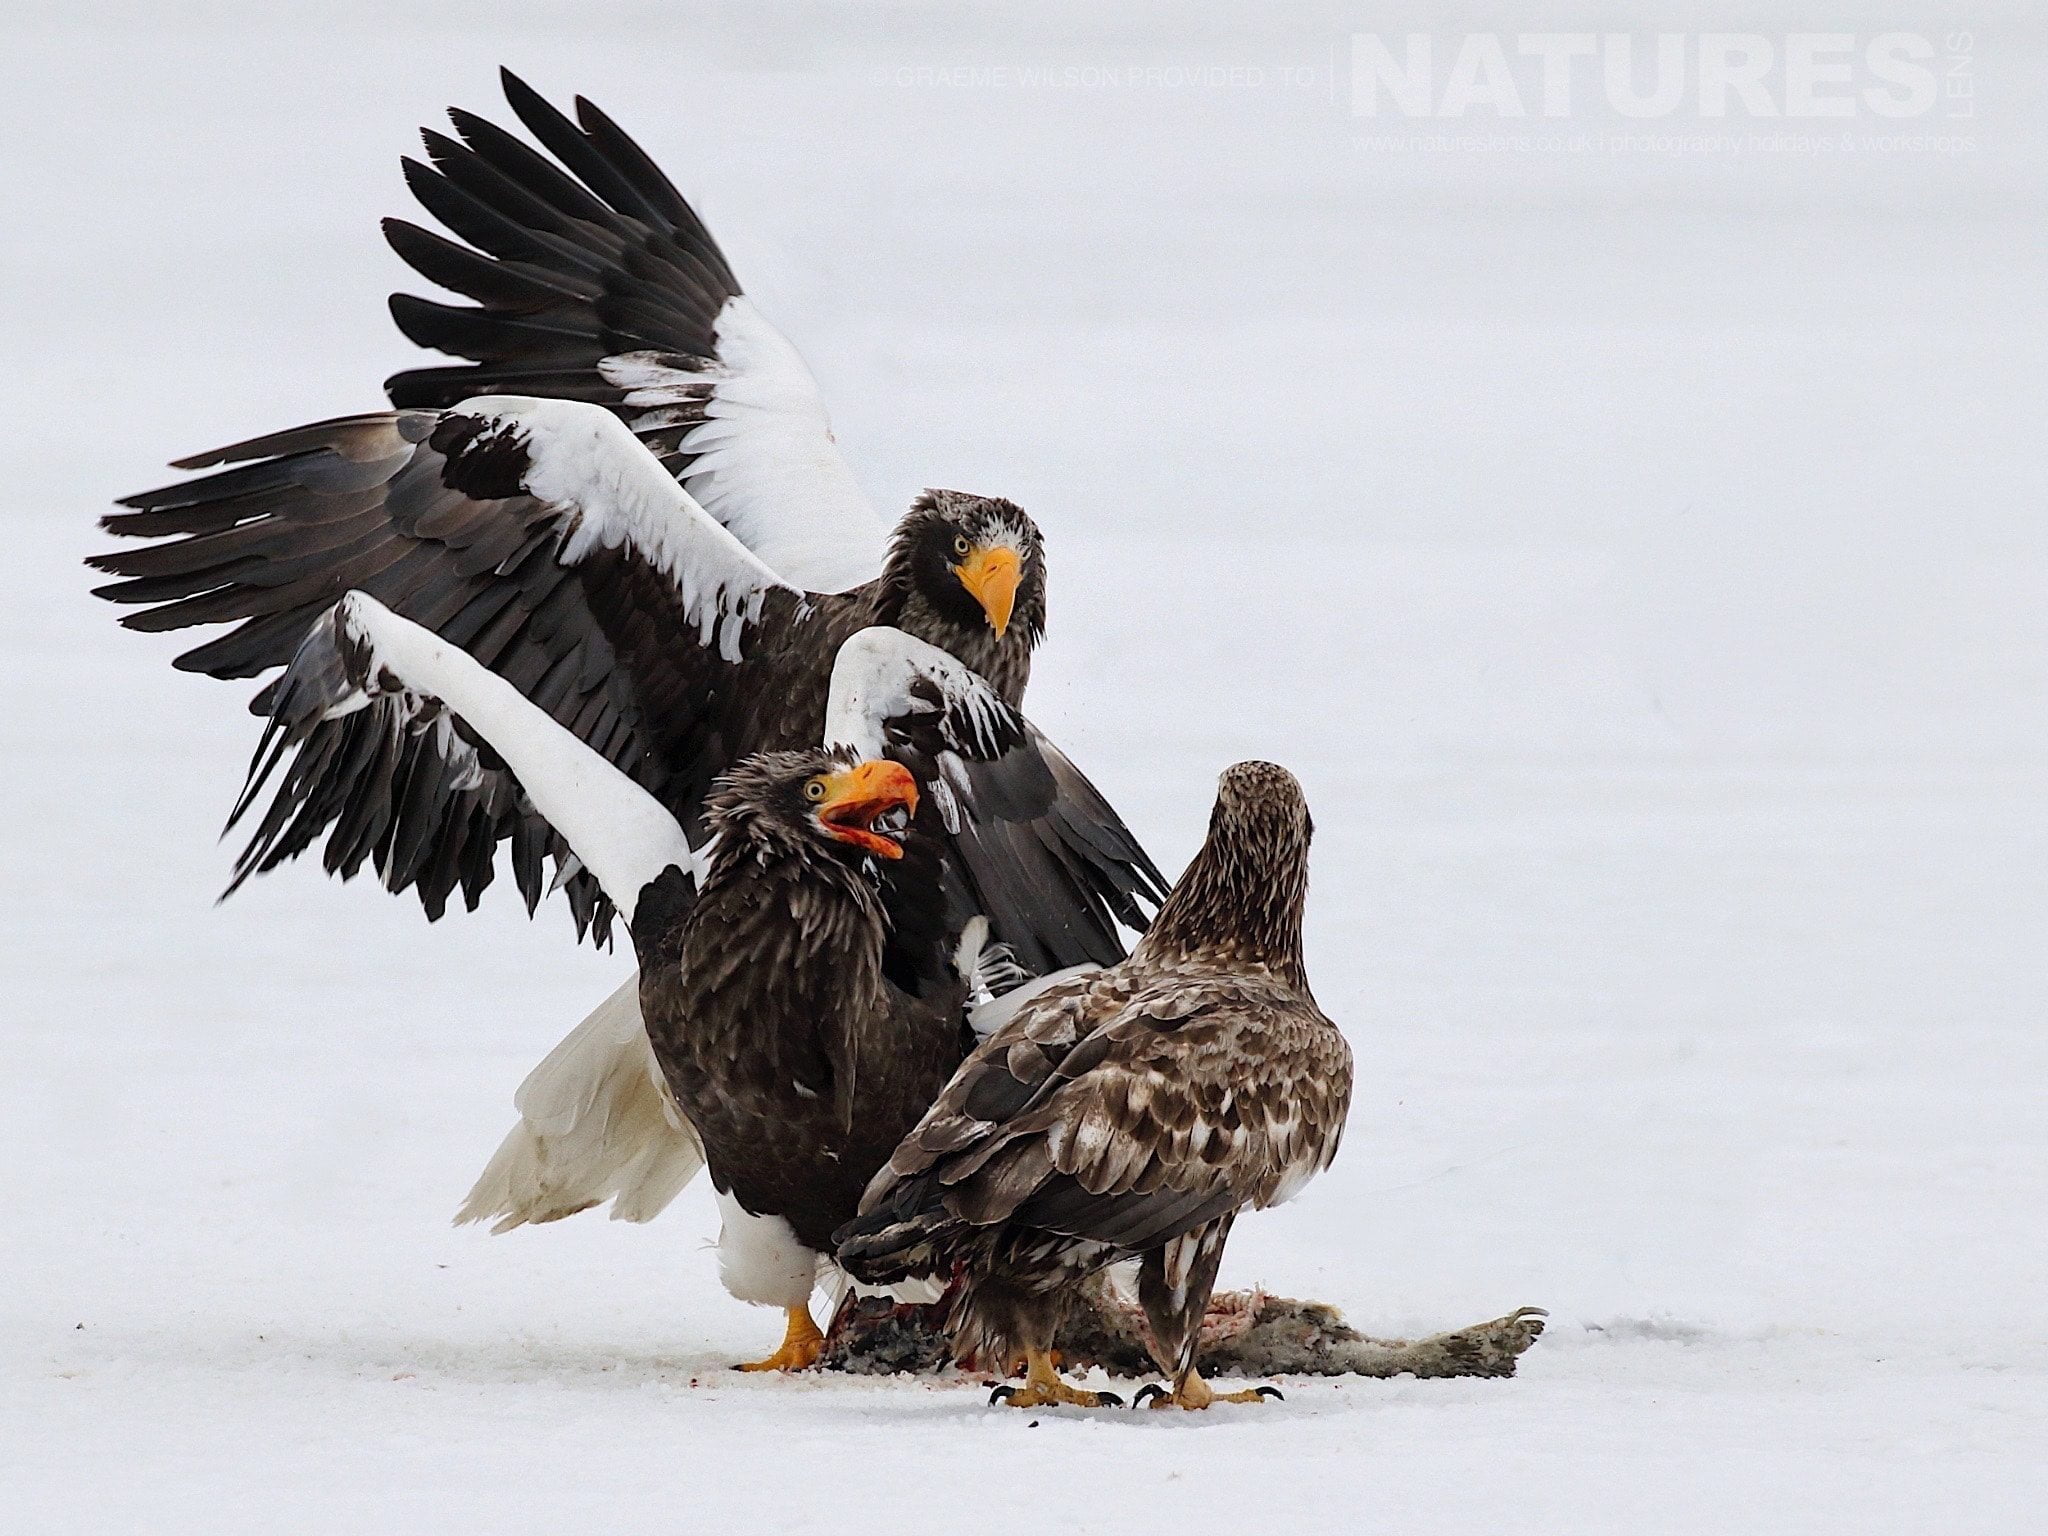 A bloody squabble breaks out over fish between several of the Stellers White Tailed Sea Eagles photographed during the 2017 NaturesLens Japanese Winter Wildlife Photography Holiday